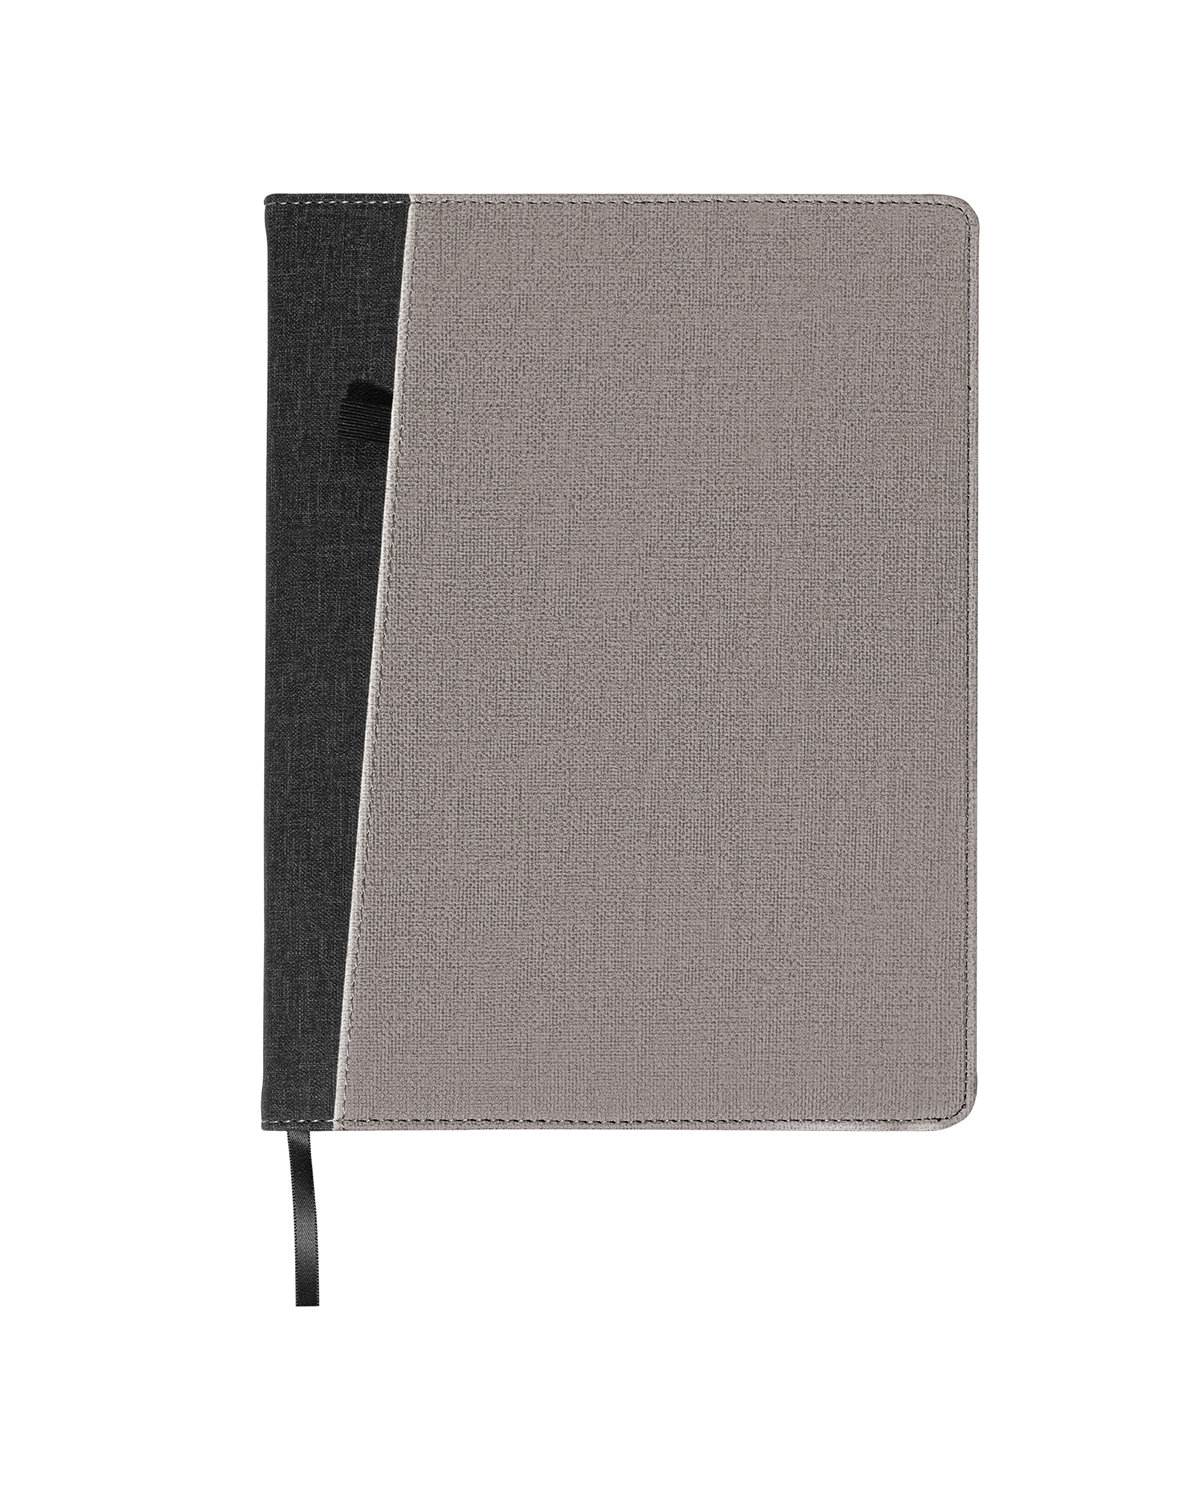 Leeman LG100 - Baxter Refillable Journal With Front ...